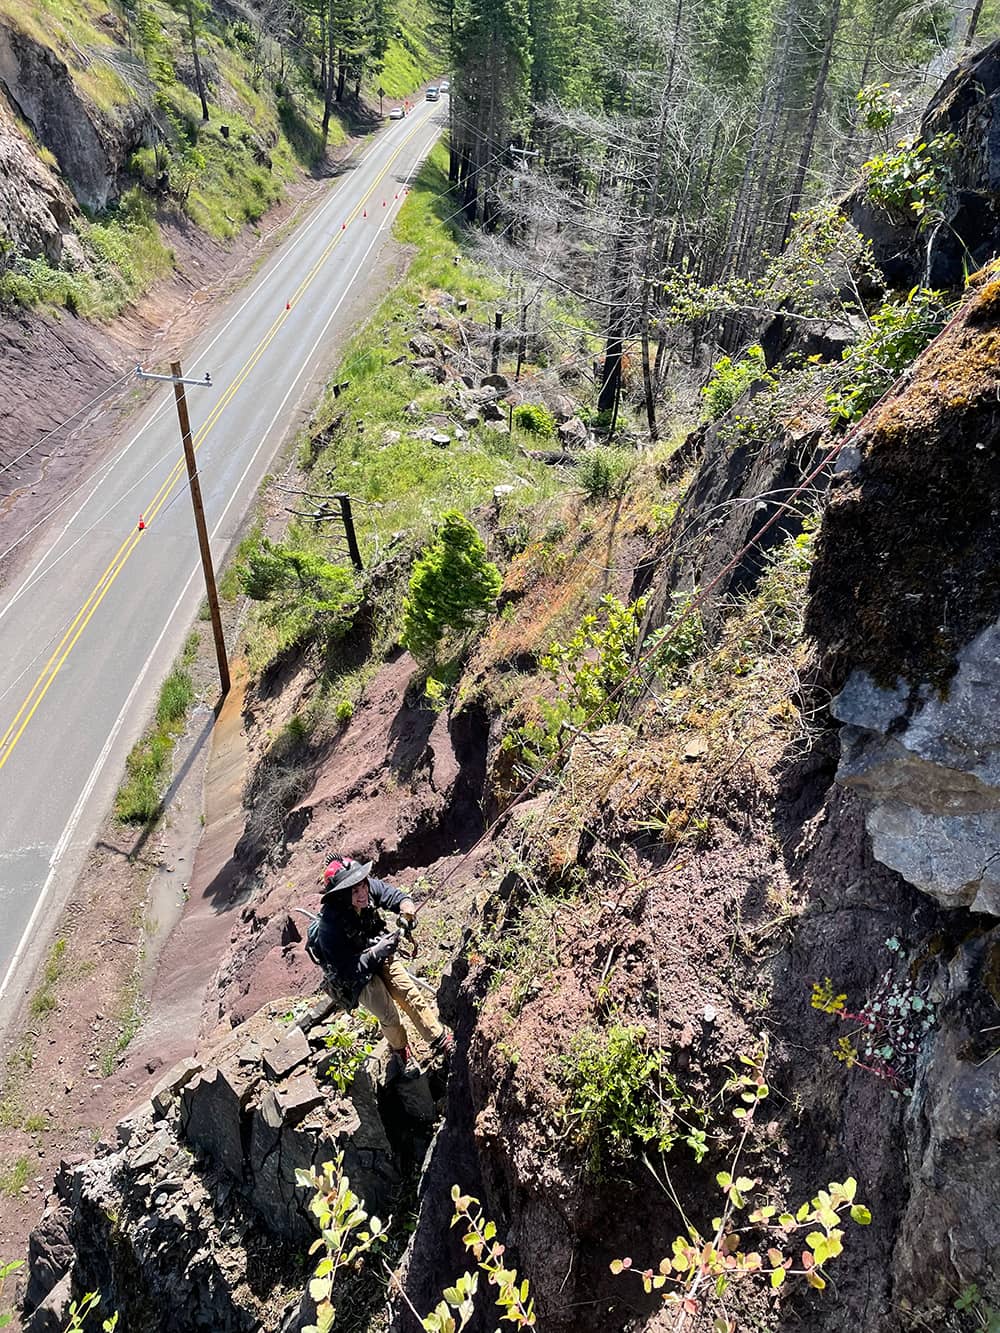 A photo of a trained professional performing rope access and rockfall mitigation work on a road cut near a highway